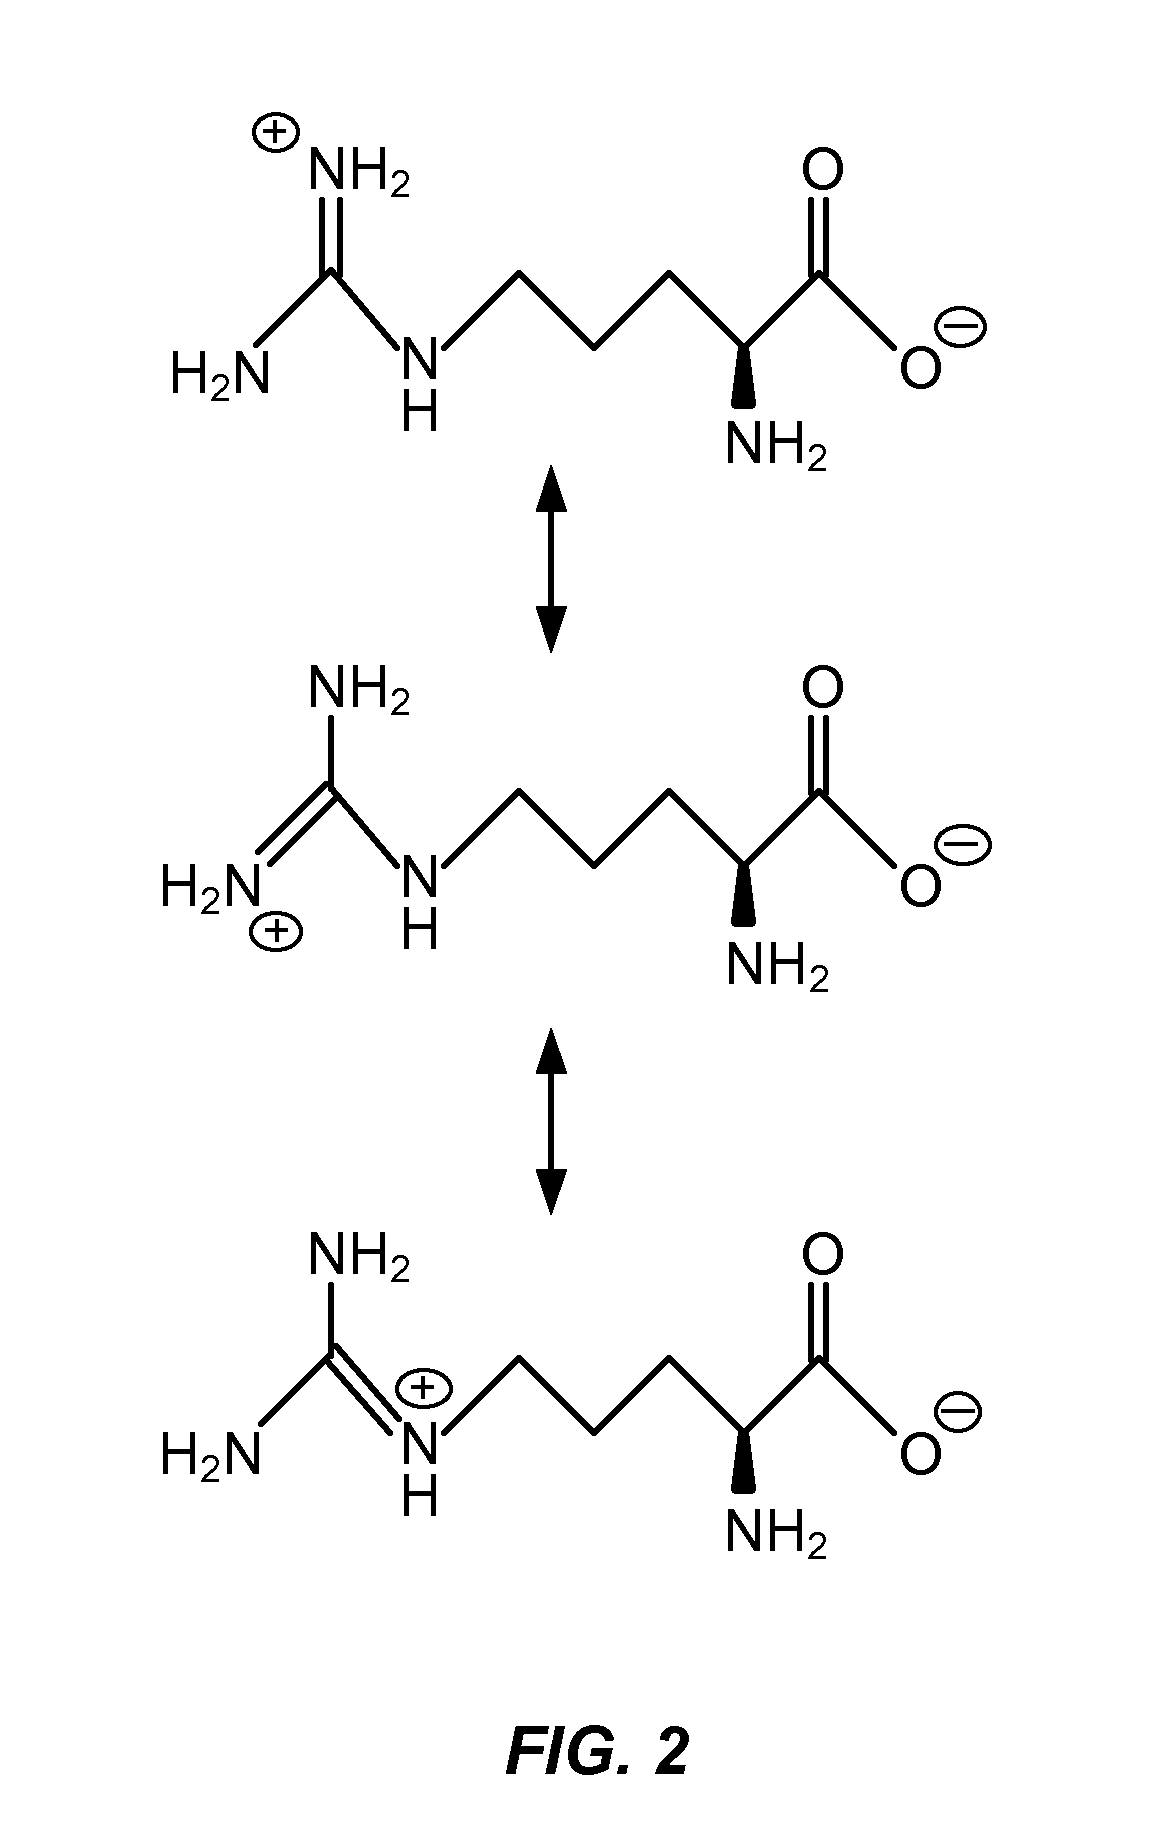 Deodorant composition and methods for use thereof